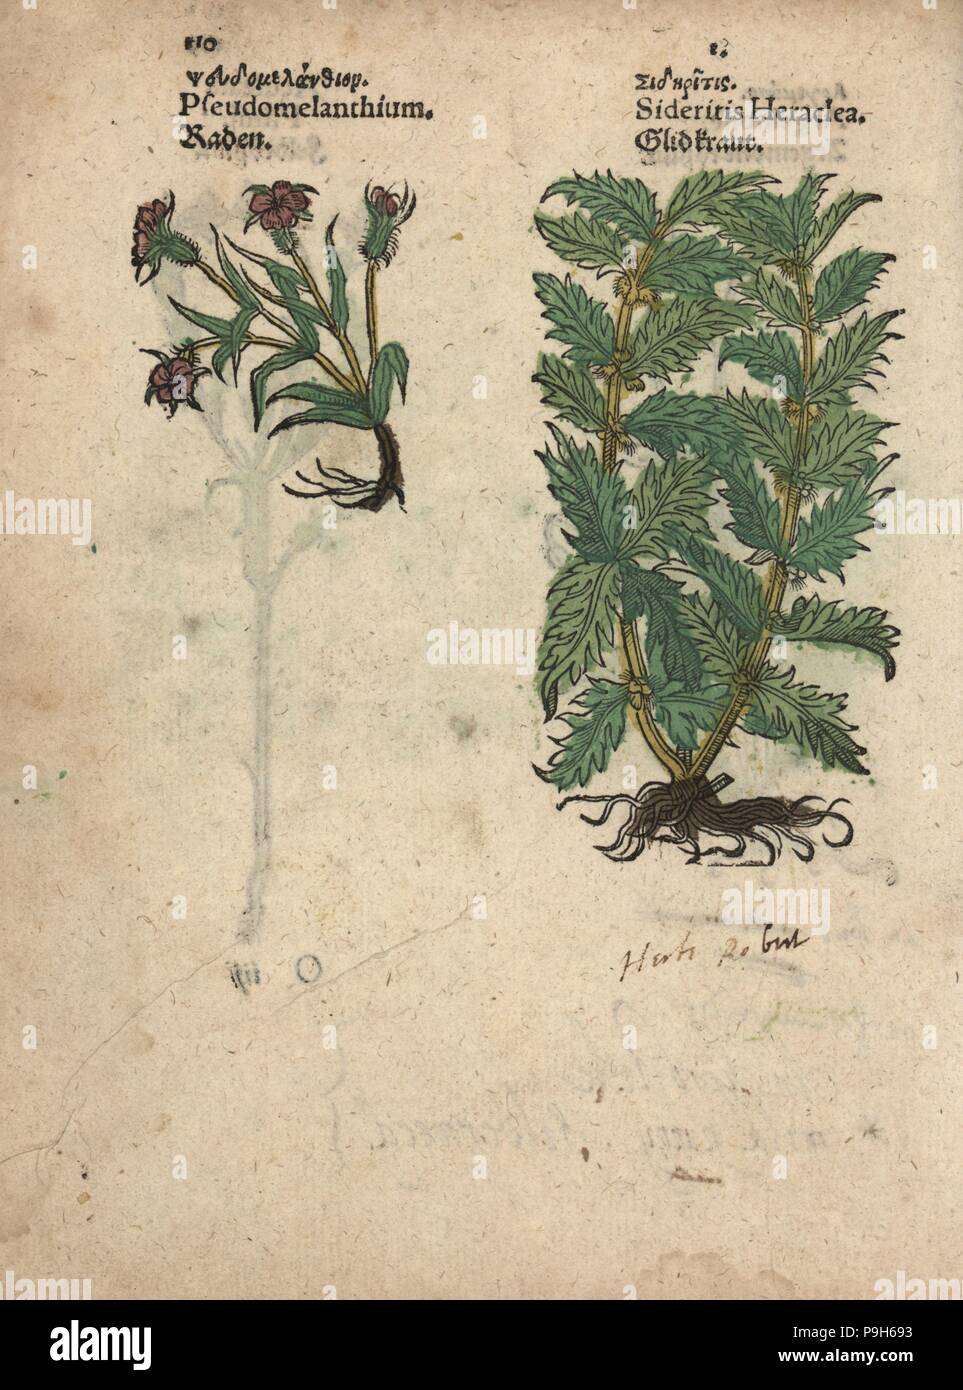 Corncockle, Agrostemma githago, and woundwort, Stachys heraclea. Handcoloured woodblock engraving of a botanical illustration from Adam Lonicer's Krauterbuch, or Herbal, Frankfurt, 1557. This from a 17th century pirate edition or atlas of illustrations only, with captions in Latin, Greek, French, Italian, German, and in English manuscript. Stock Photo